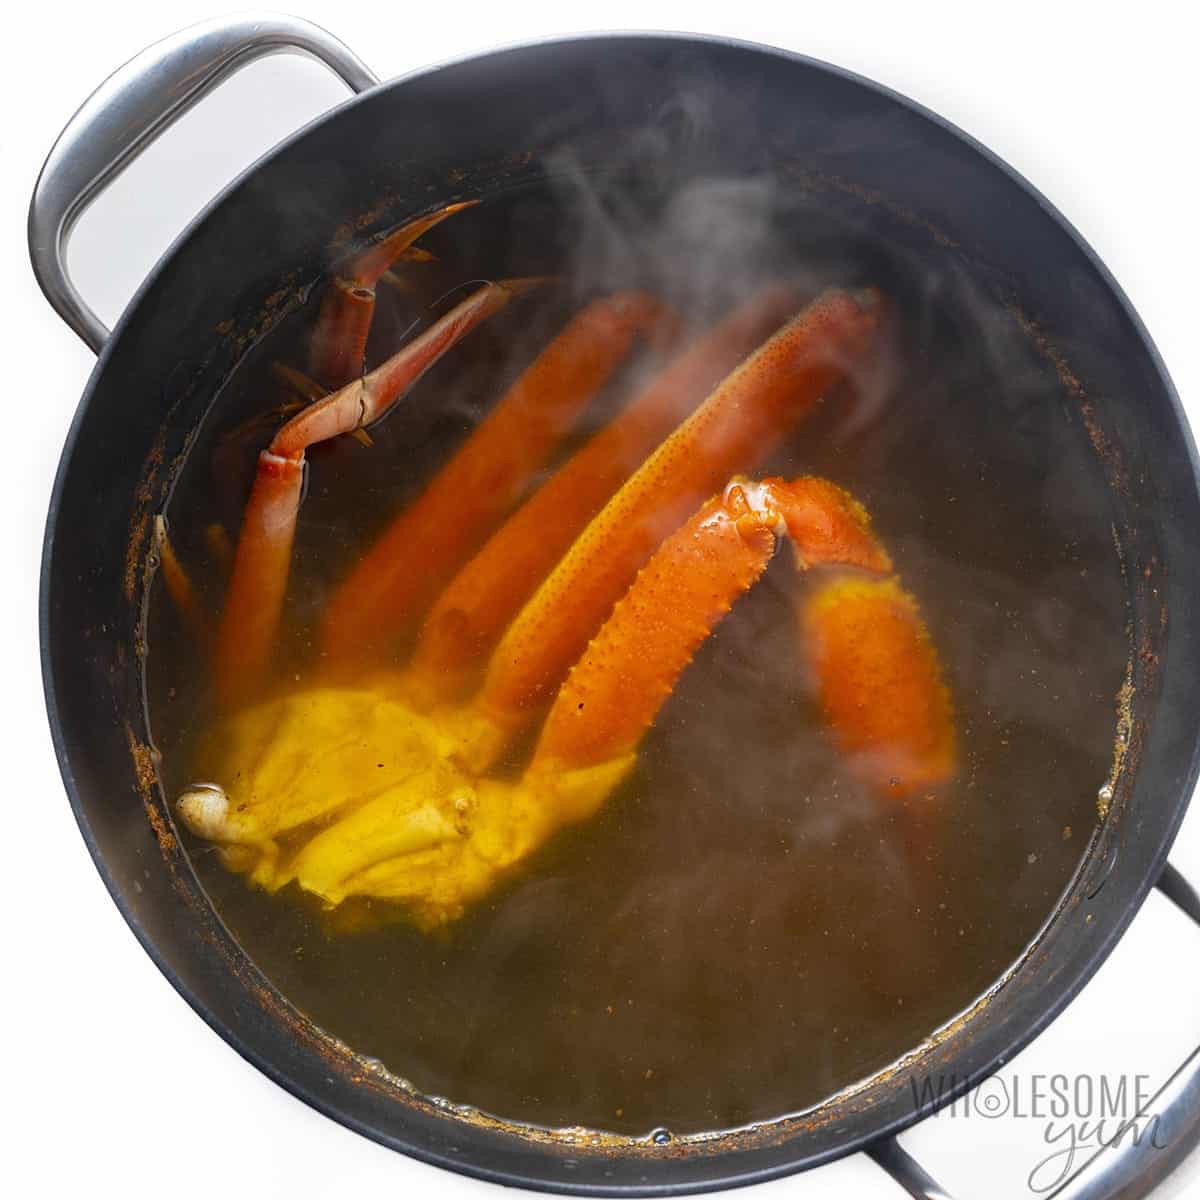 Boiled crab legs in a pot